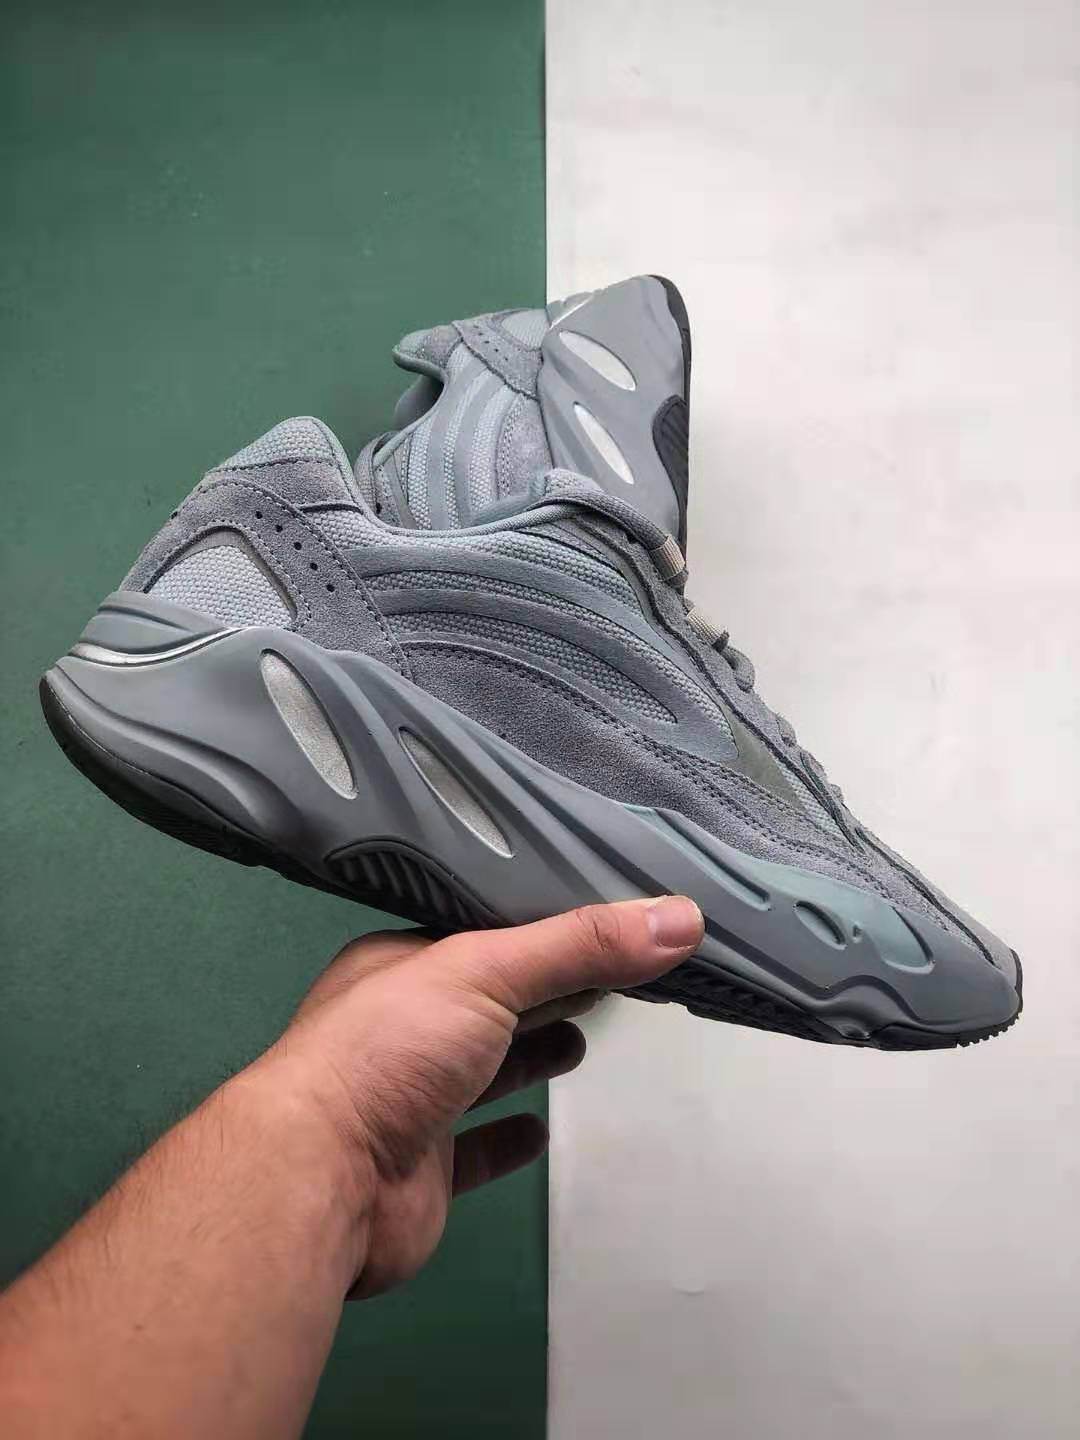 Adidas Yeezy Boost 700 V2 Hospital Blue FV8424 - Limited Edition Sneakers